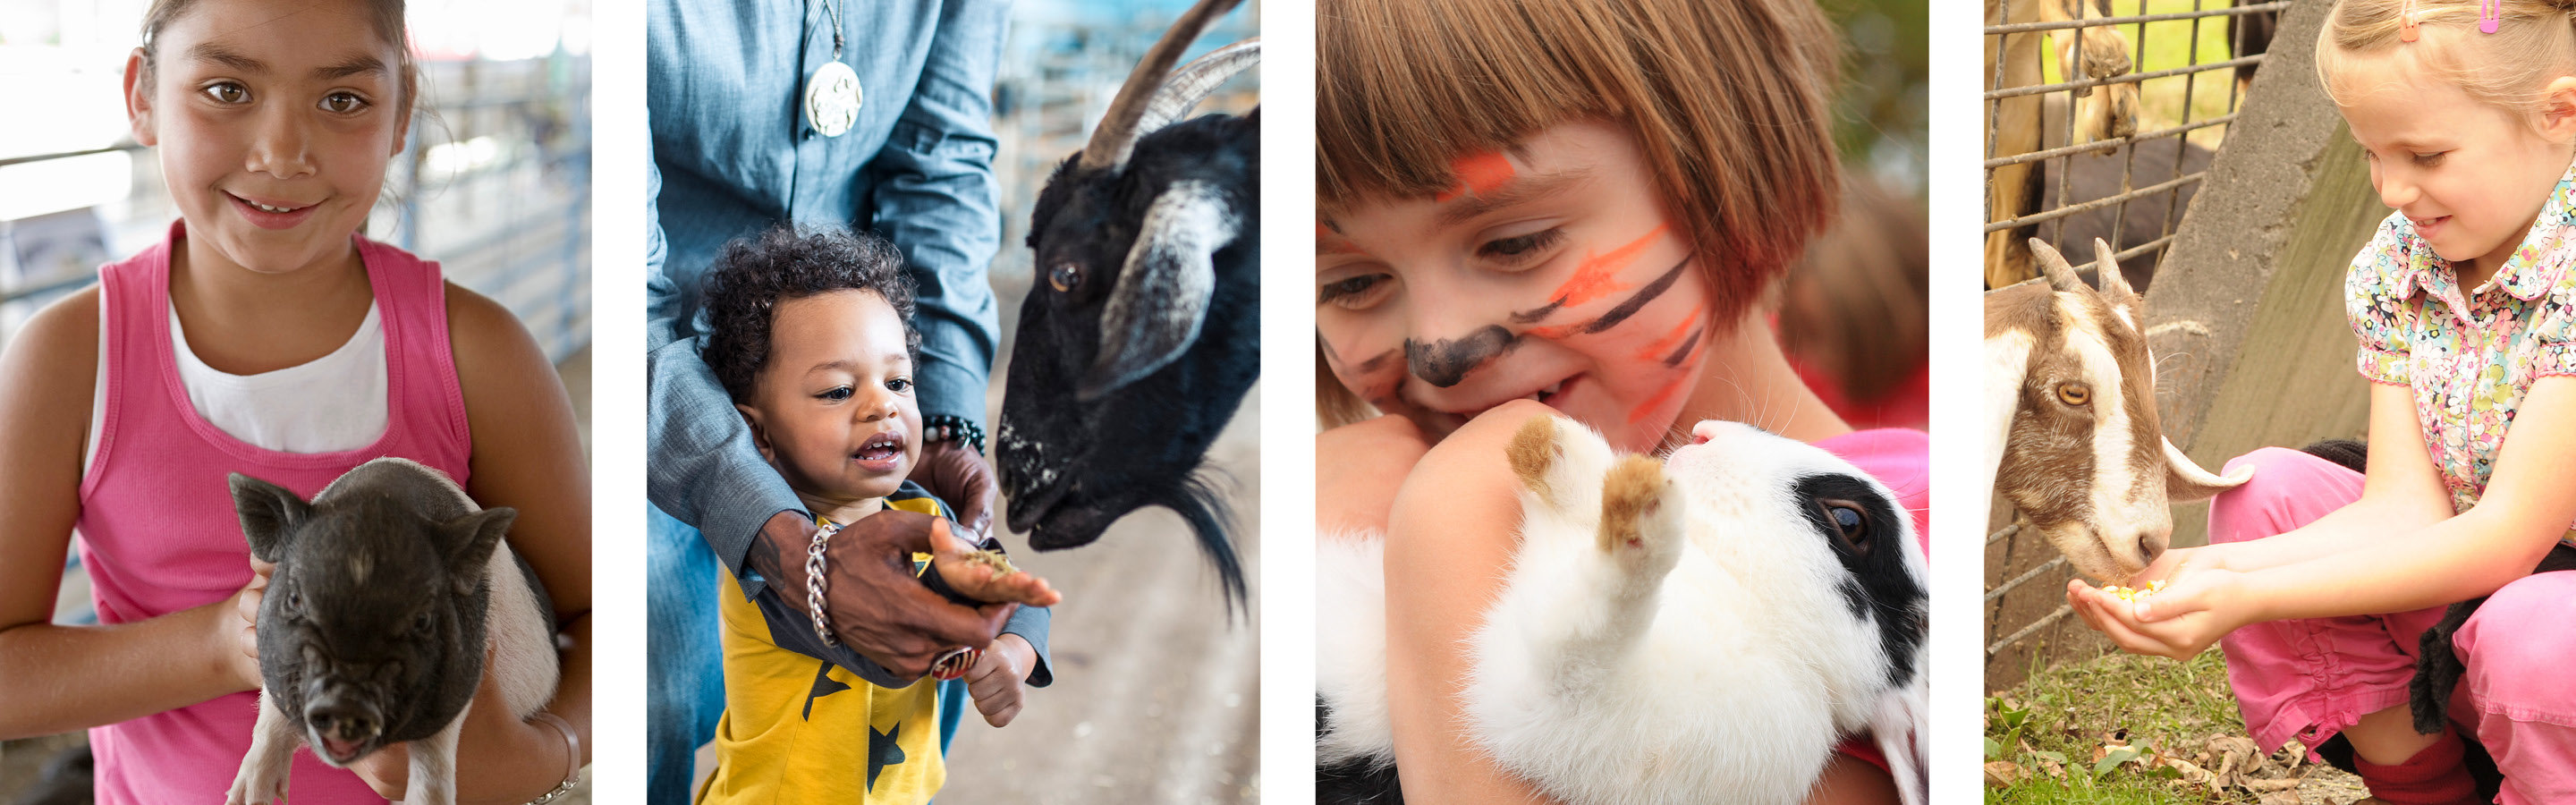 Collage: Children with petting zoo animals